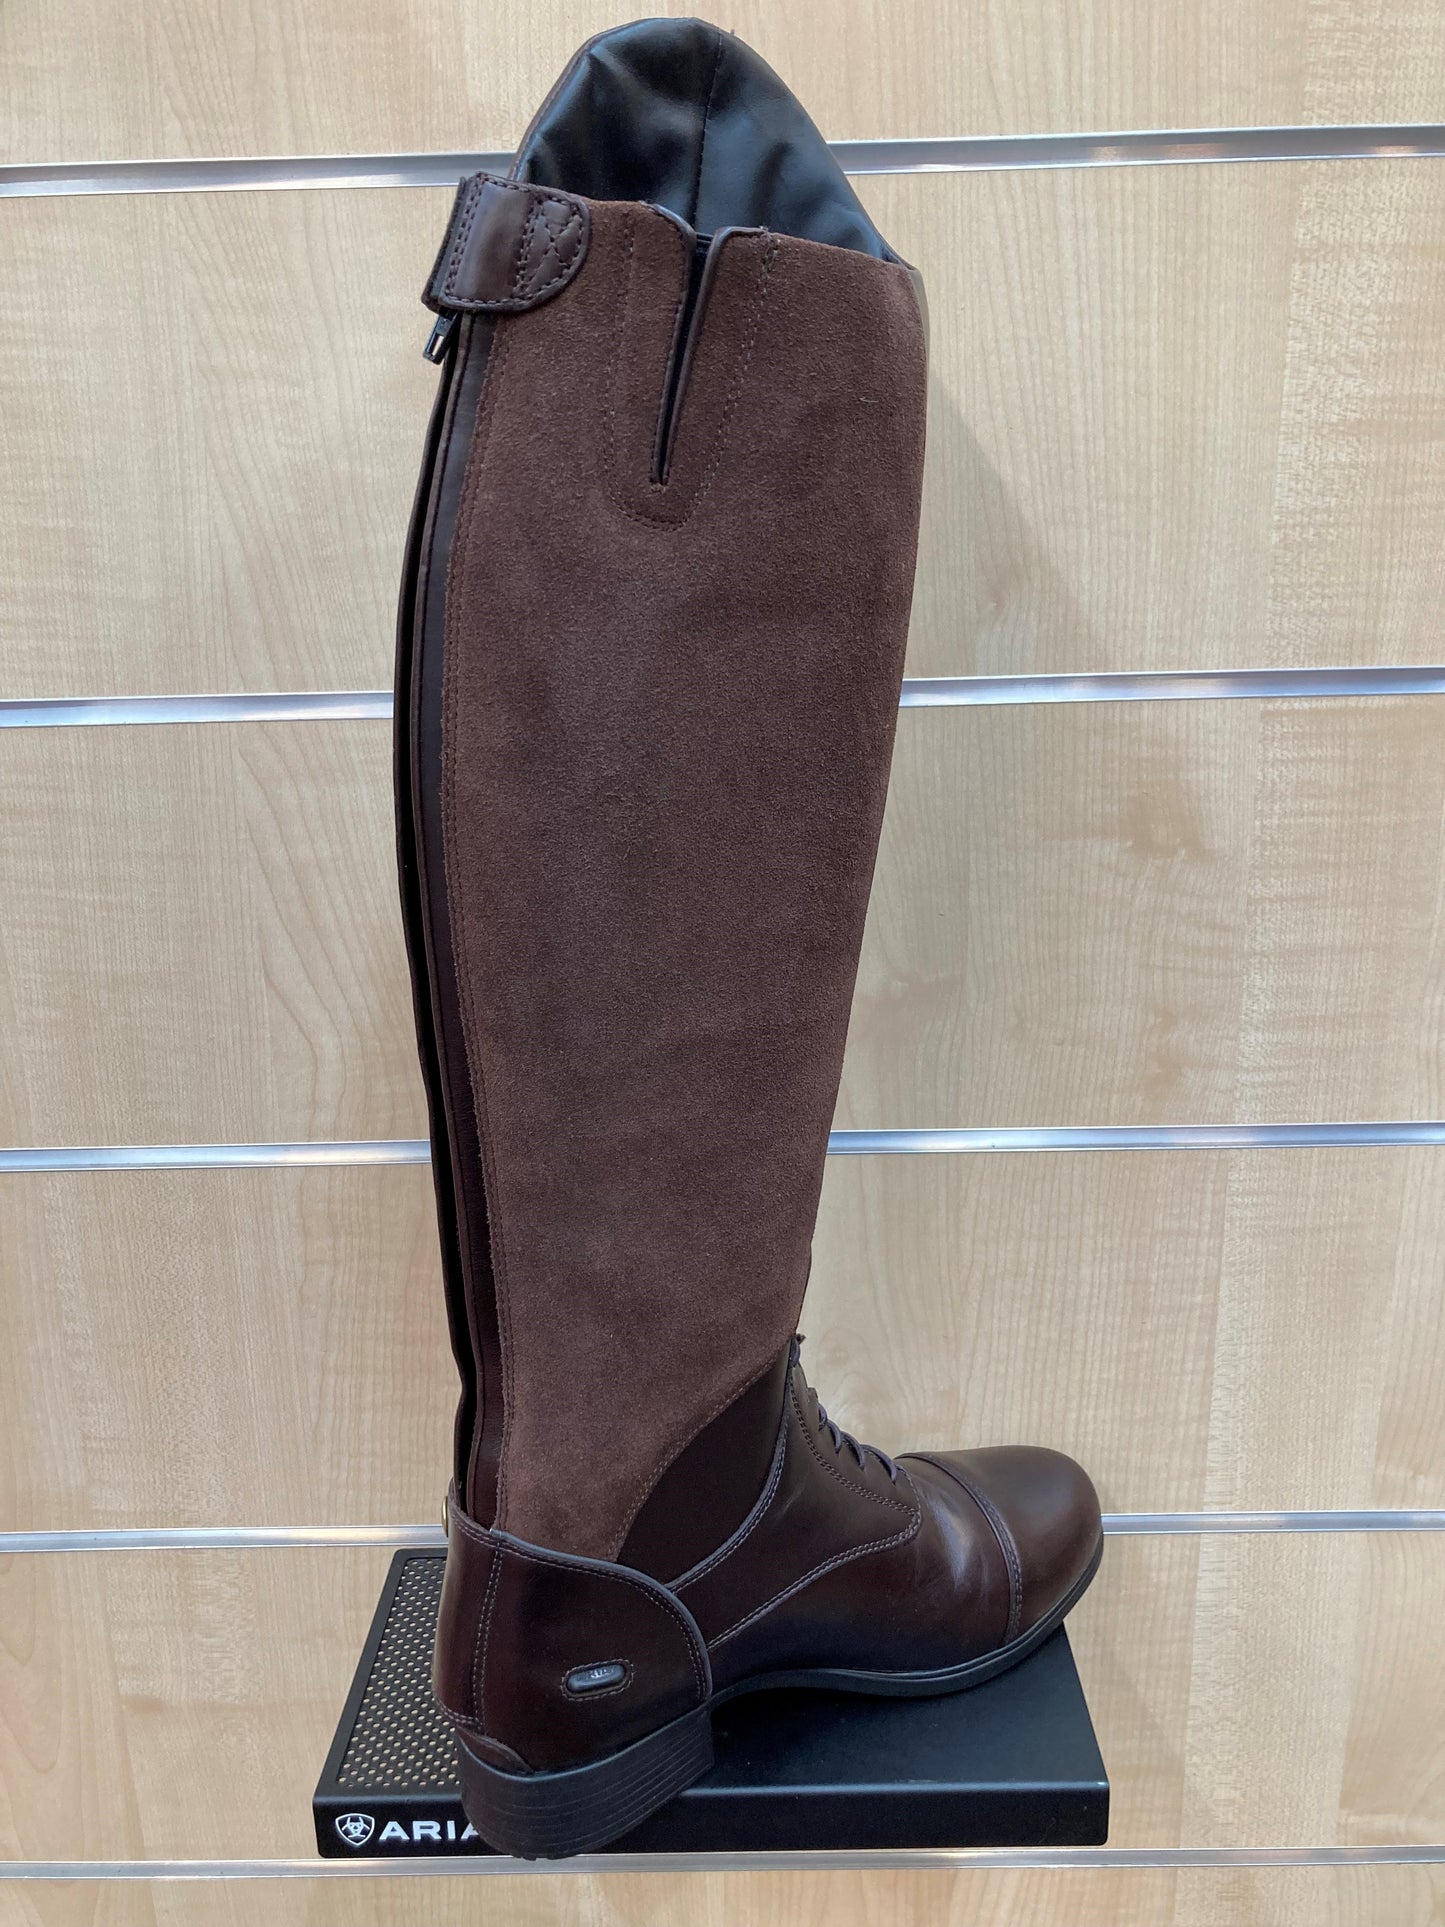 Winterreitstiefel Bromont Pro Tall H20 Insulated waxed chocolate